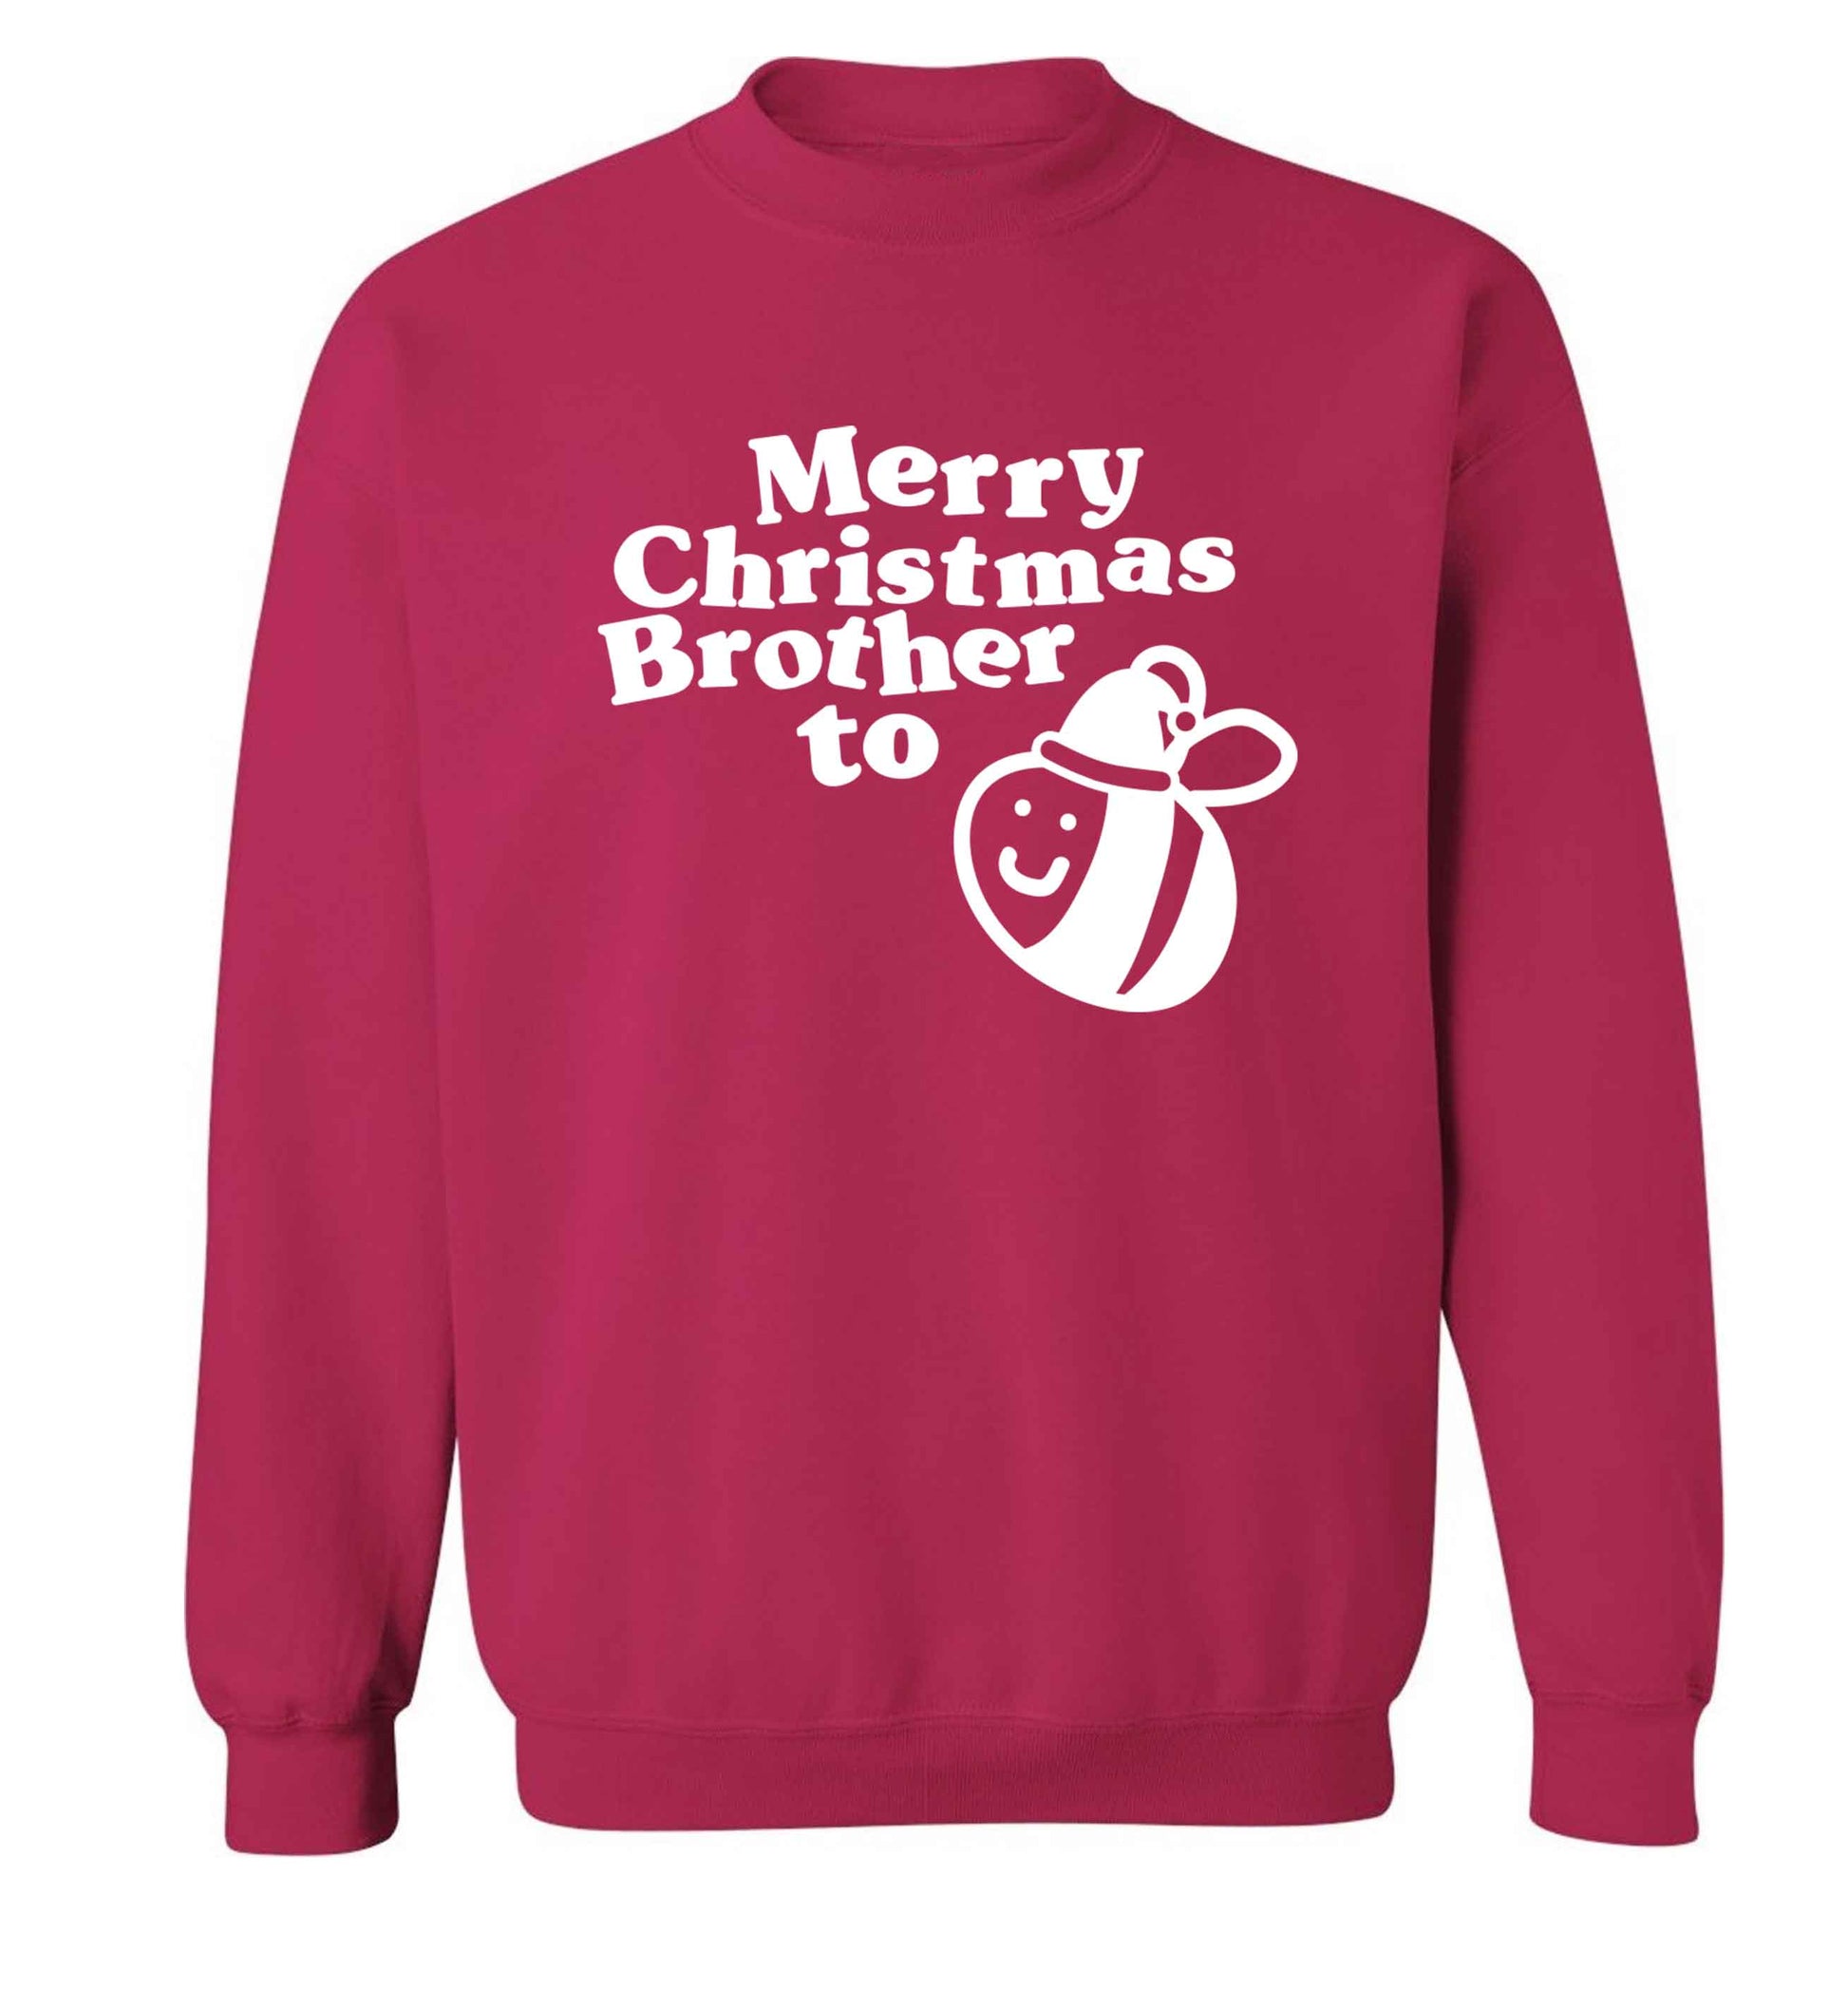 Merry Christmas brother to be Adult's unisex pink Sweater 2XL